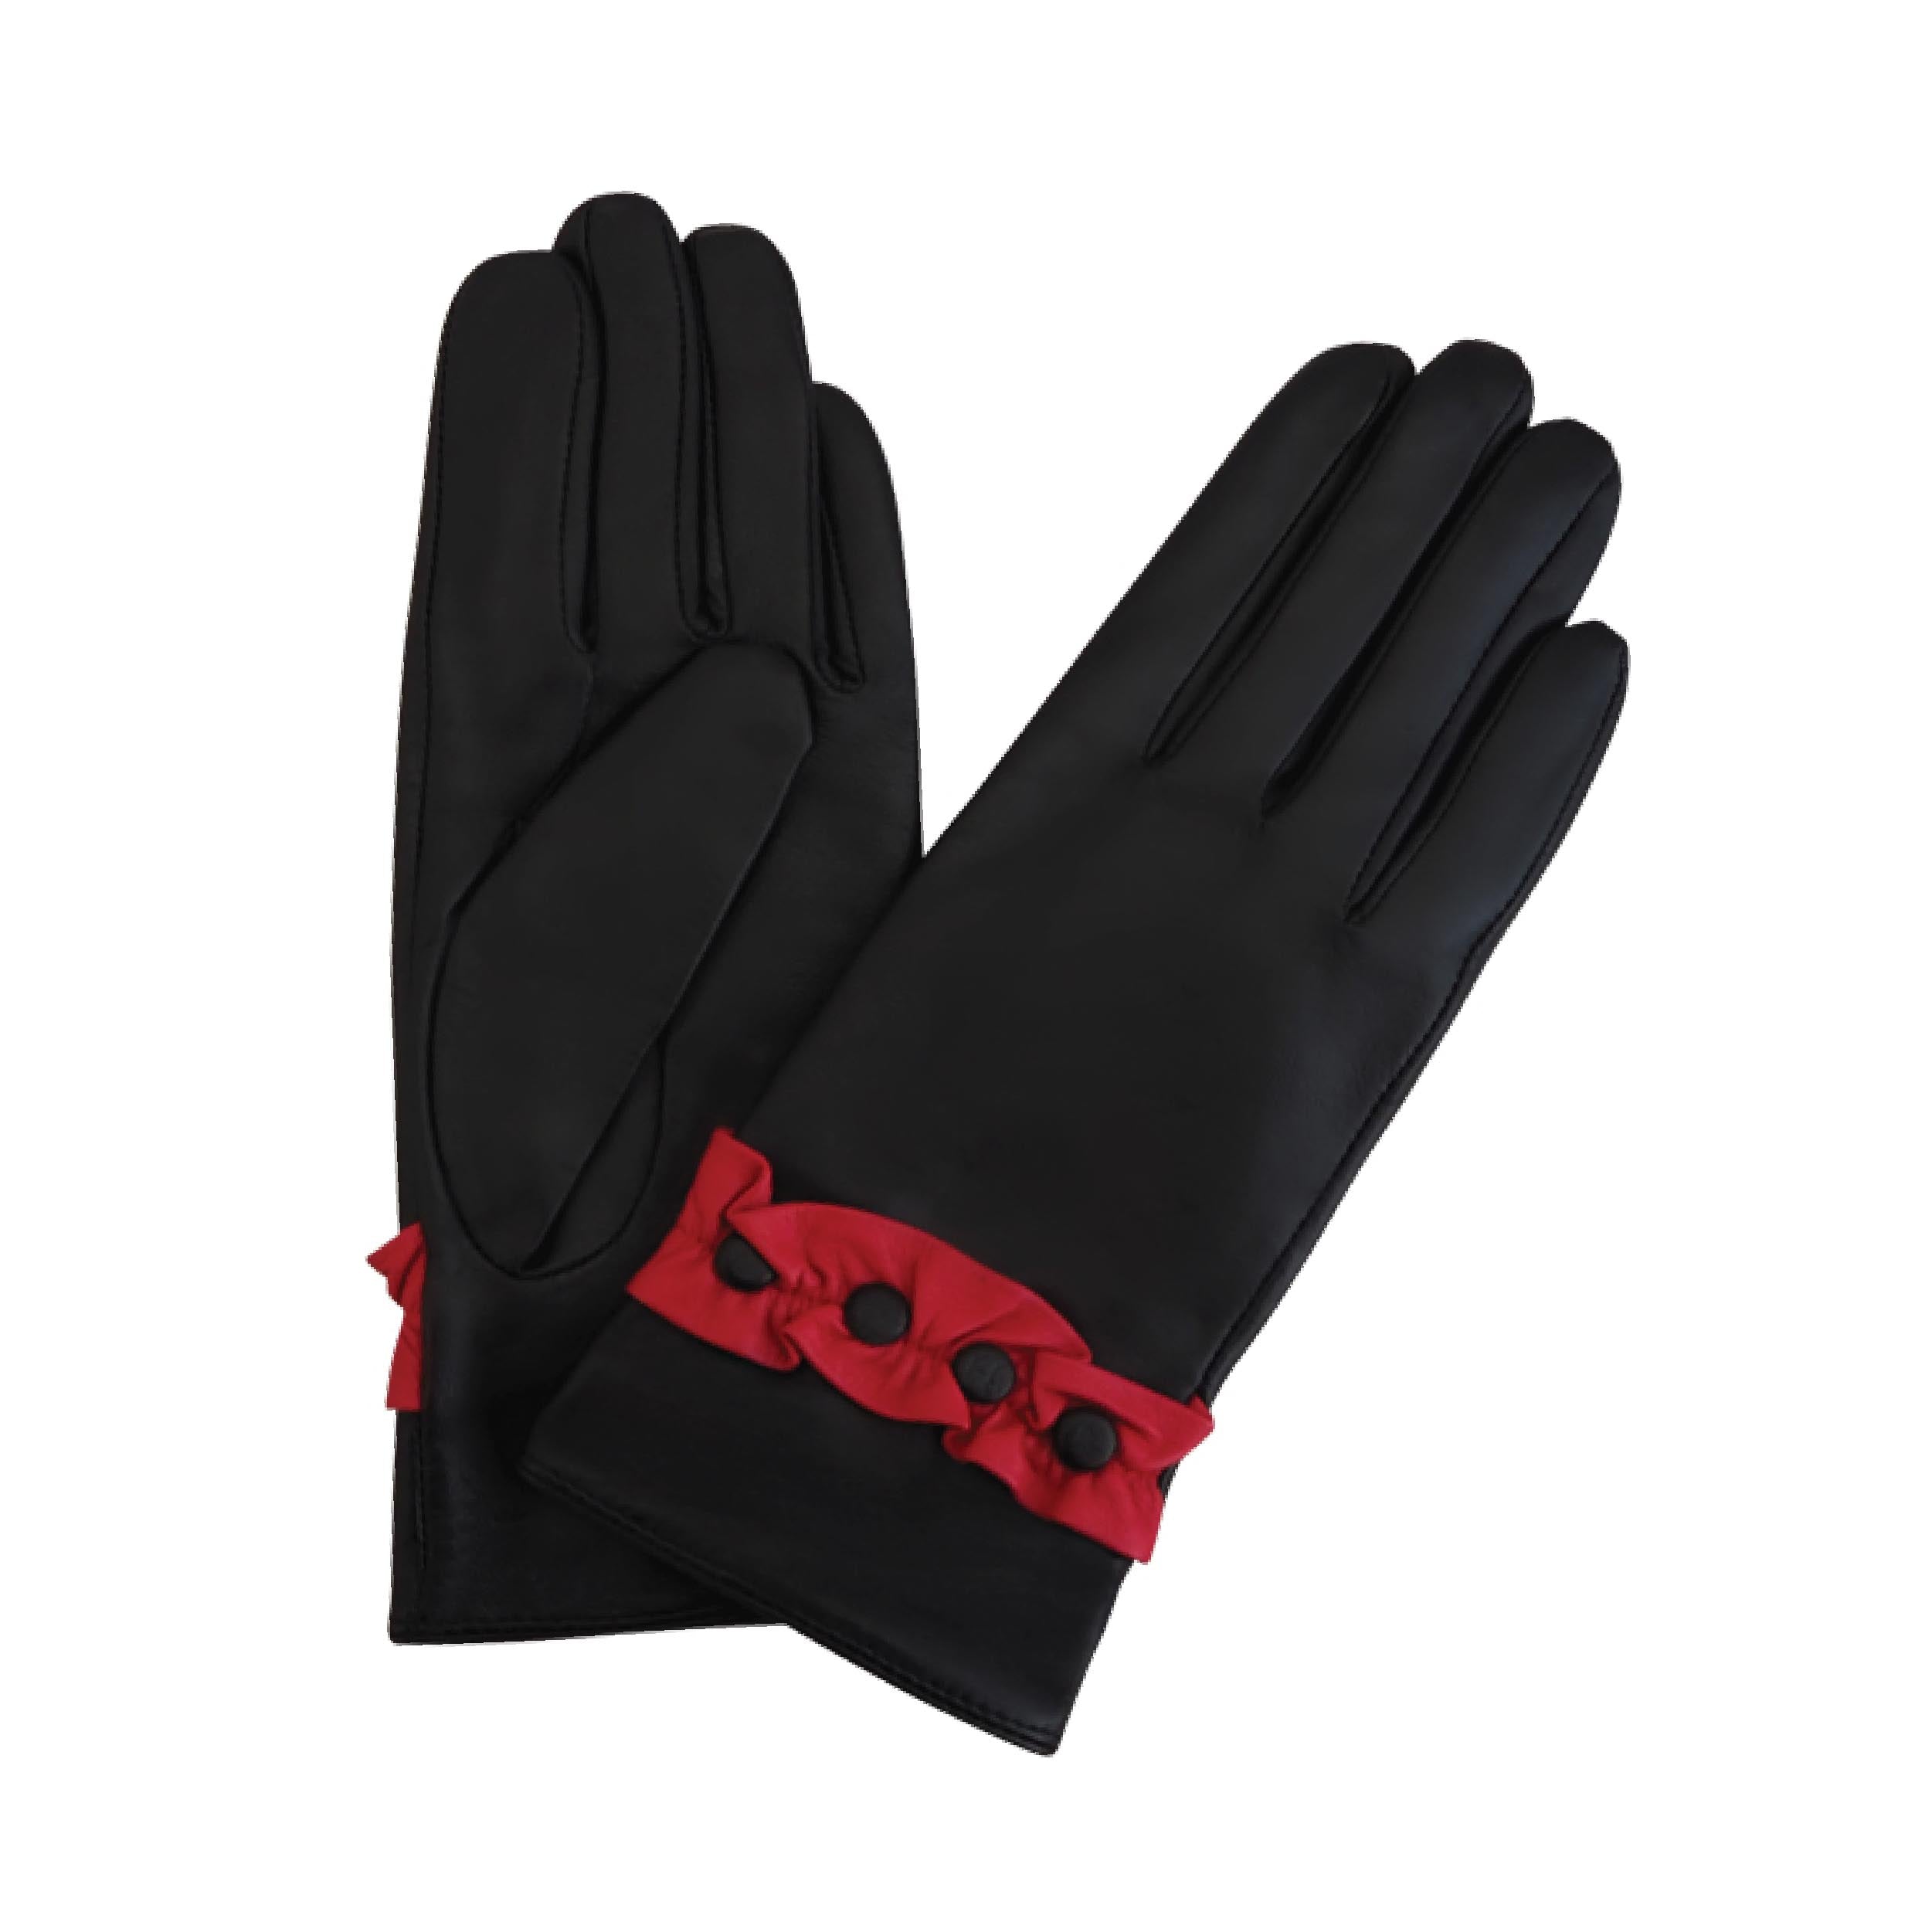 Leather Glove Ruffle Button Black/Red Picture 1 regular from Cadelle Leather